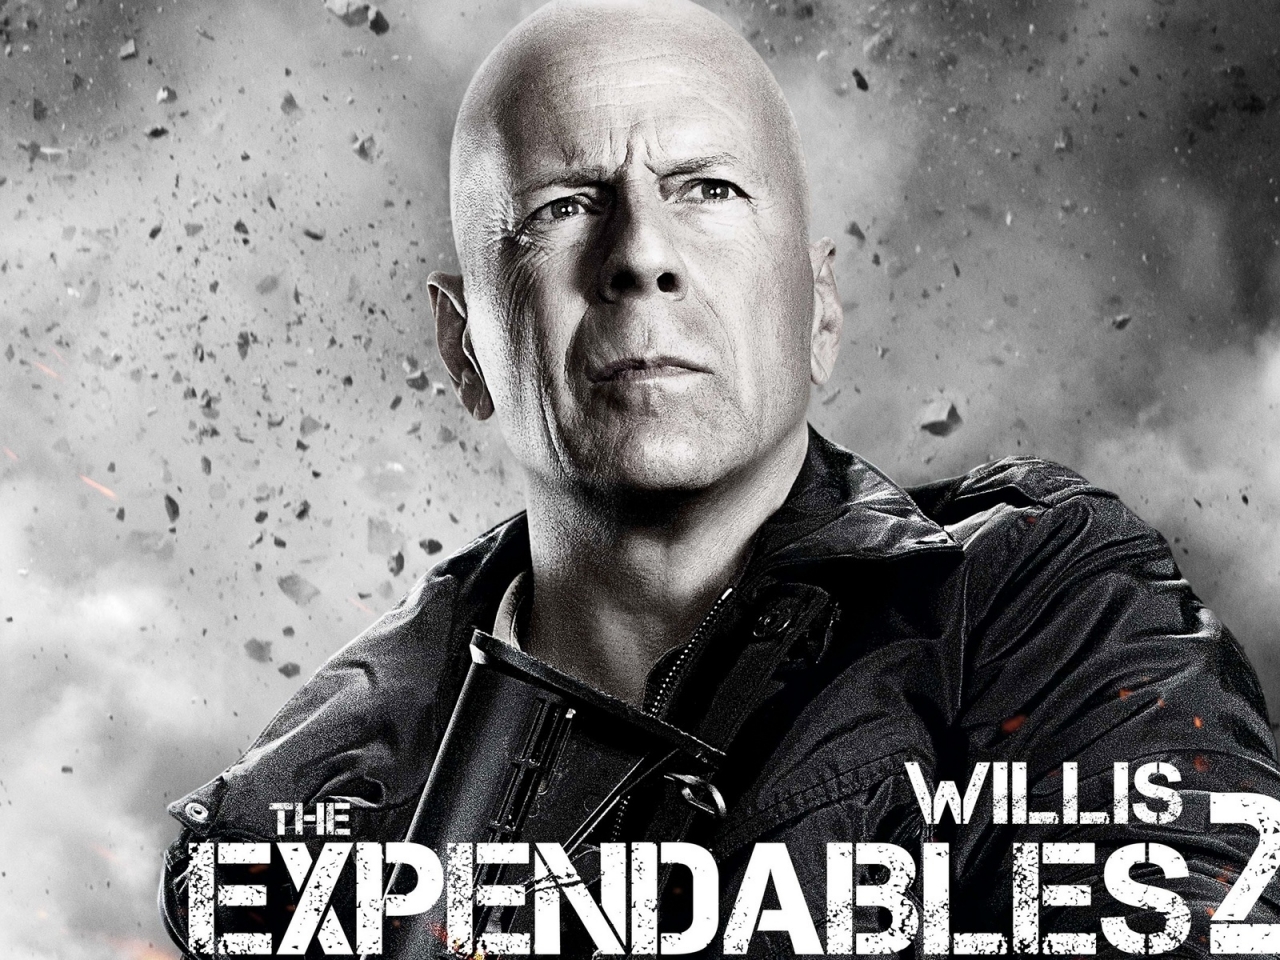 Bruce Willis Expendables 2 for 1280 x 960 resolution